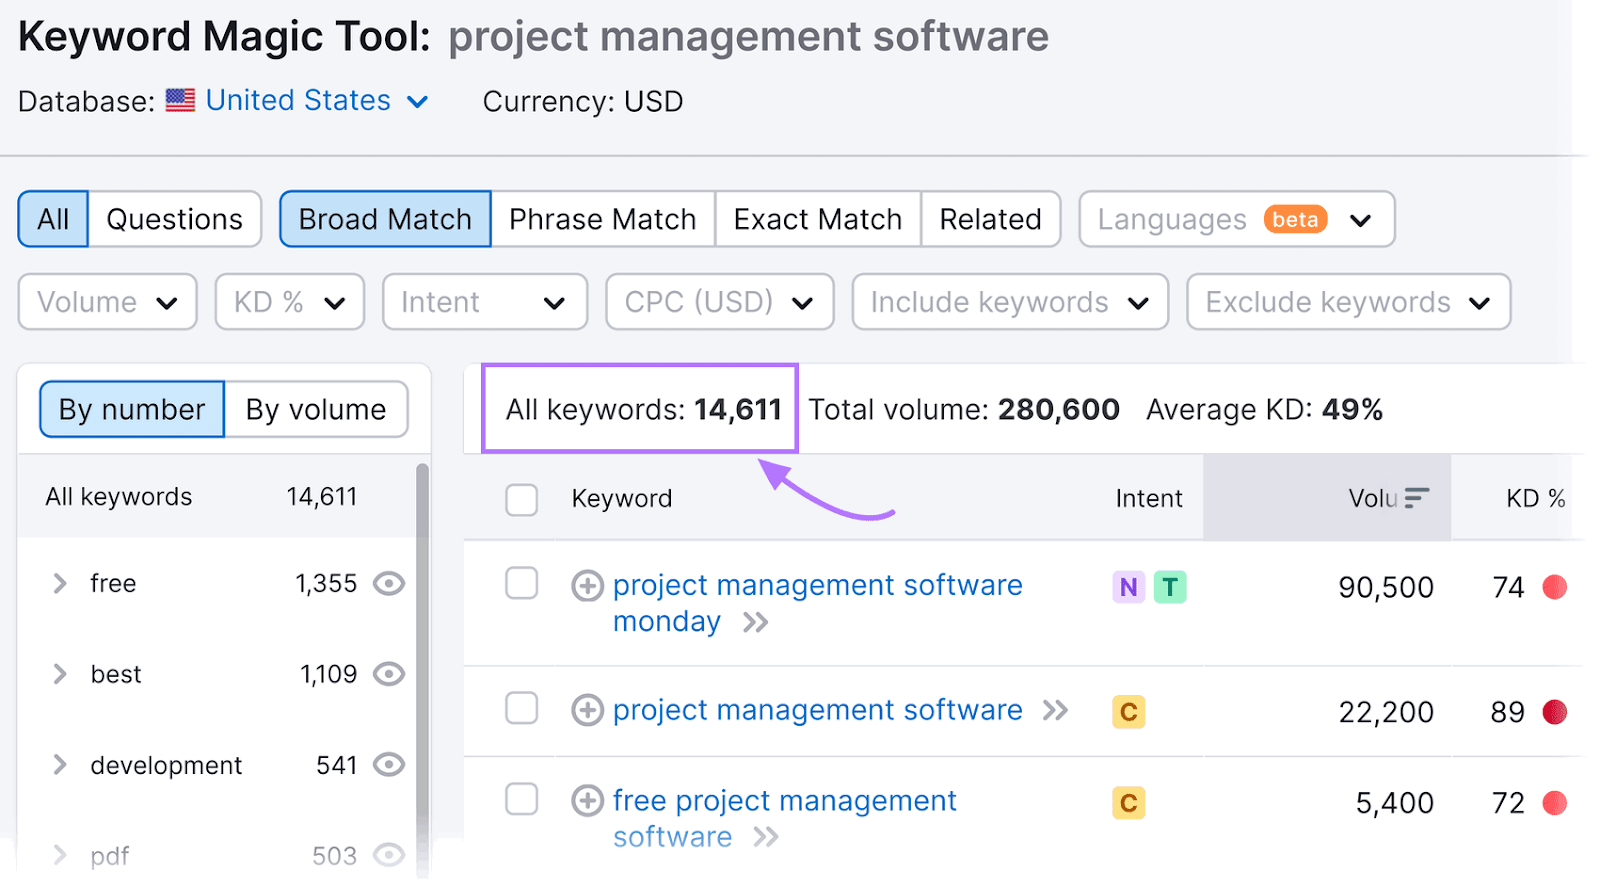 Keyword Magic Tool results for "project management software" show 14,611 keywords